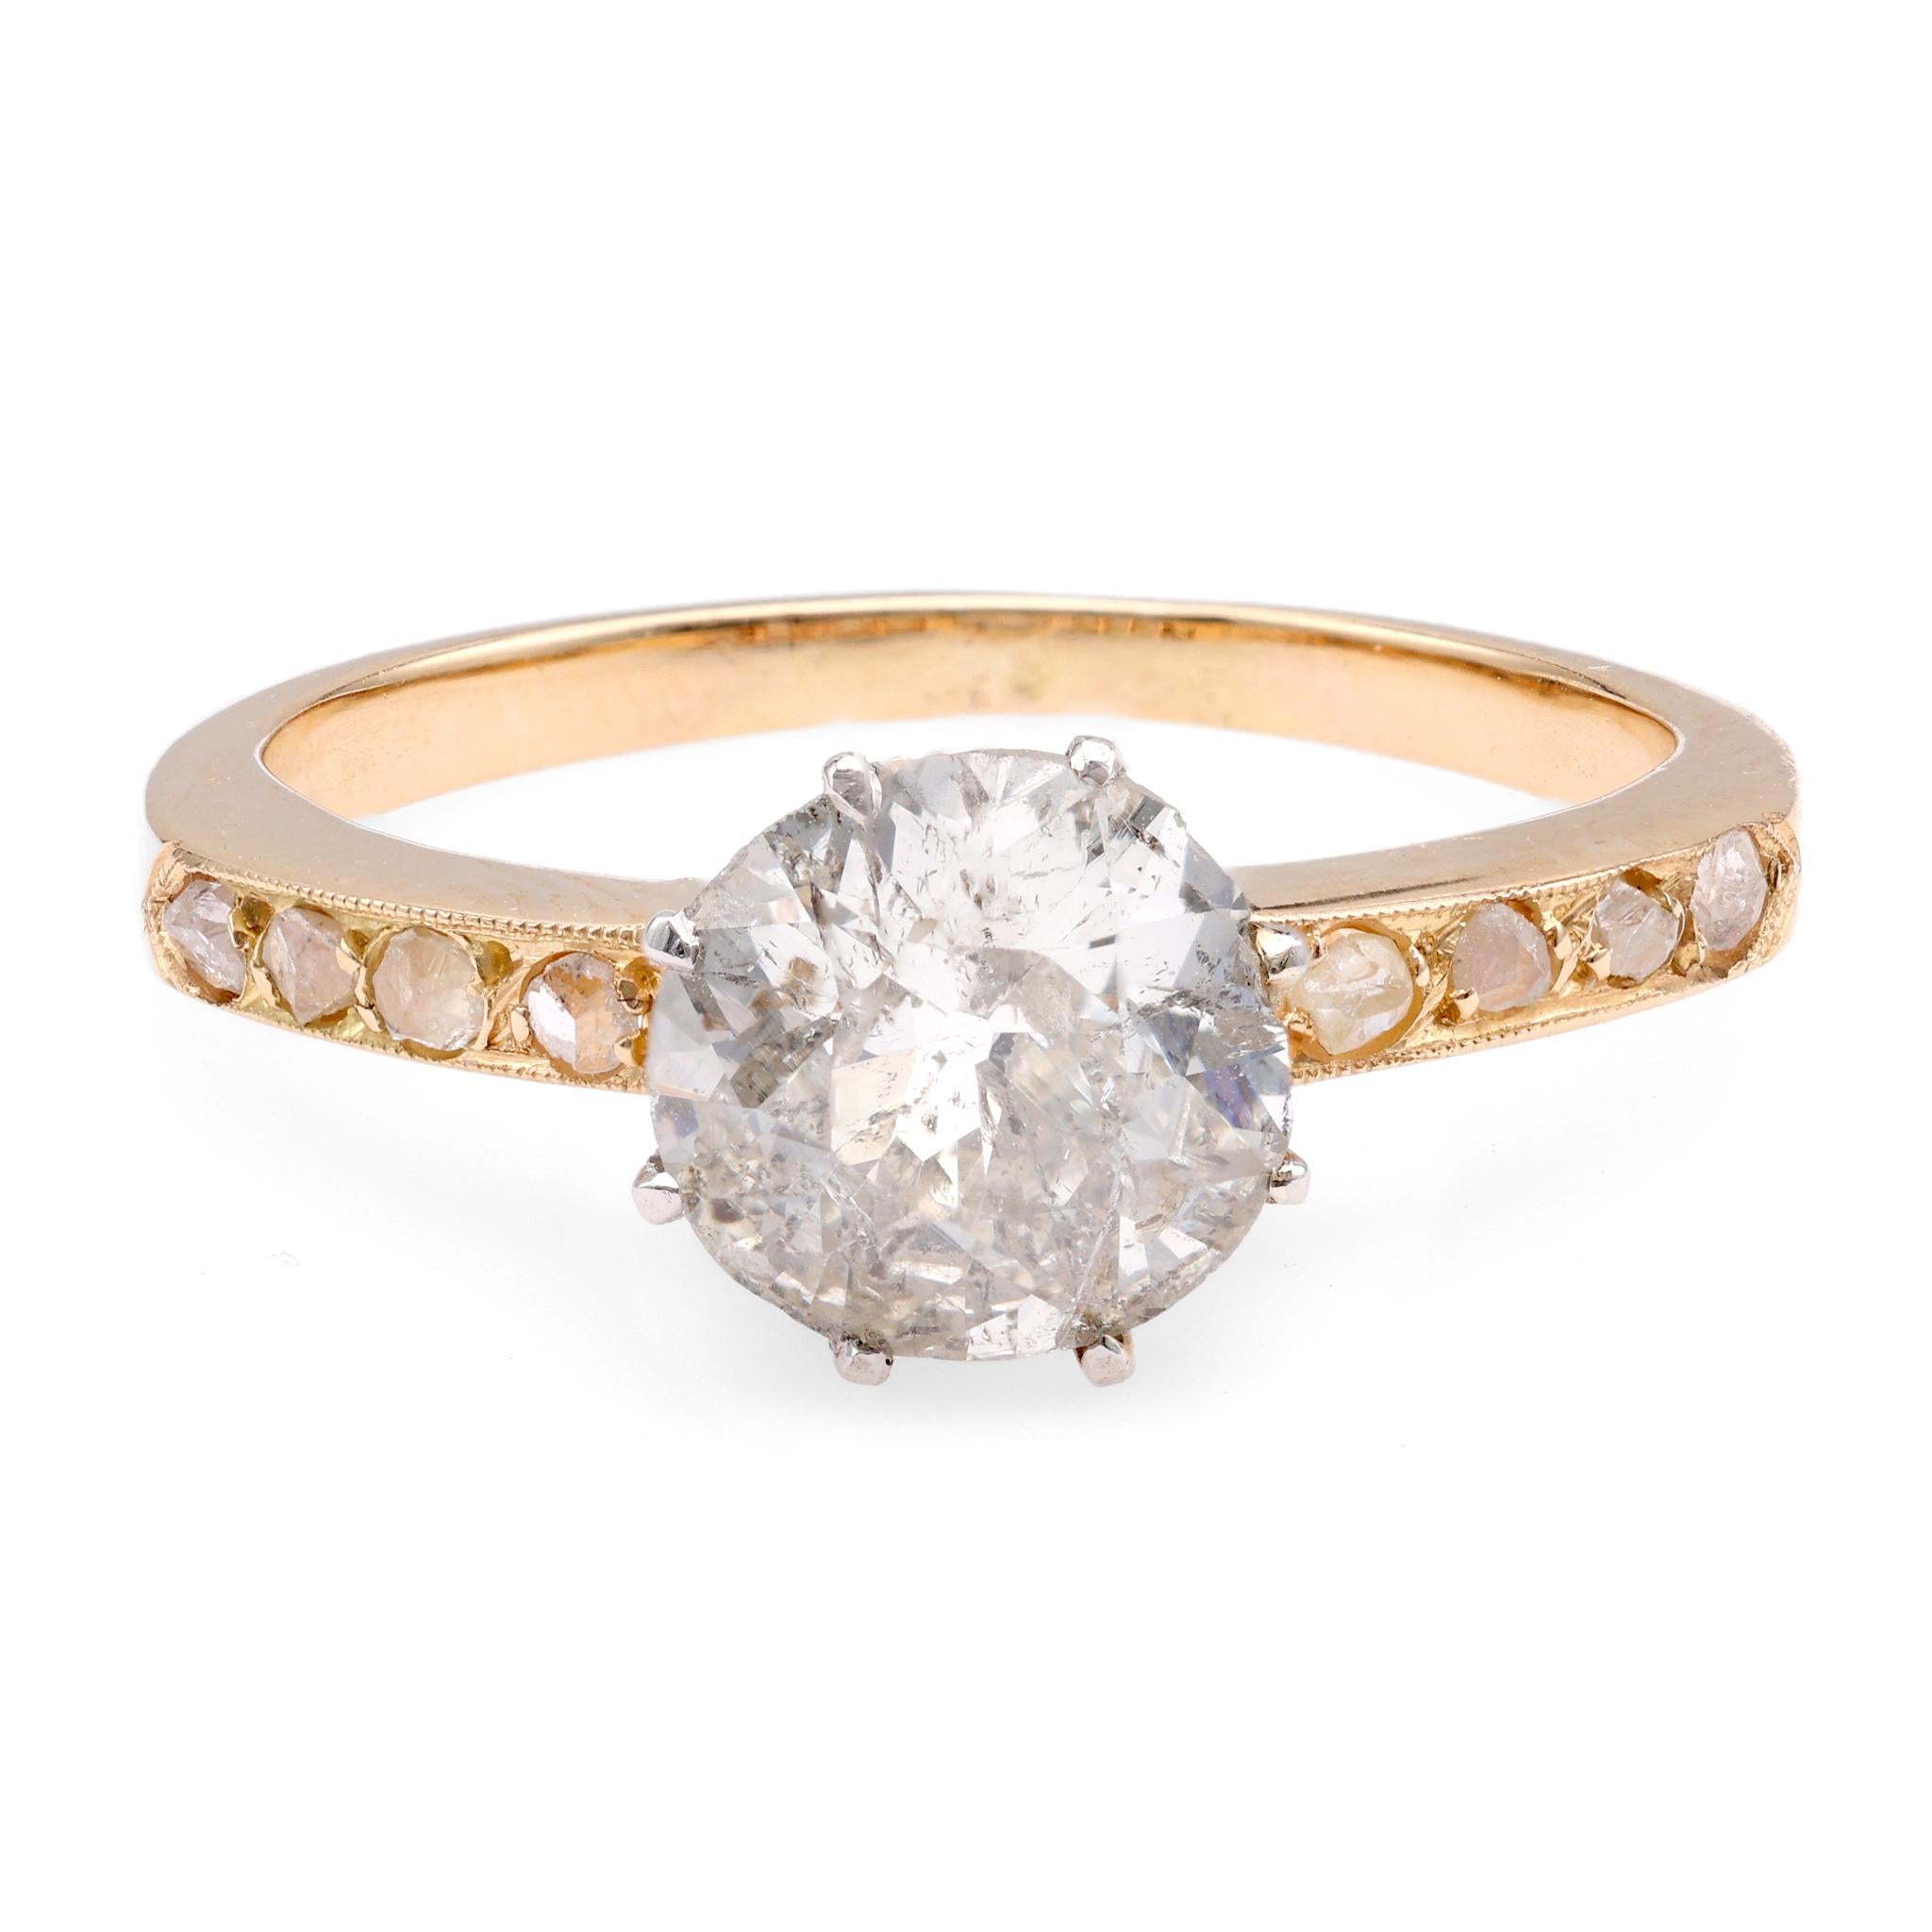 Edwardian Inspired 1.24 Carat Diamond 18K Yellow and White Gold Engagement Ring  Jack Weir & Sons   